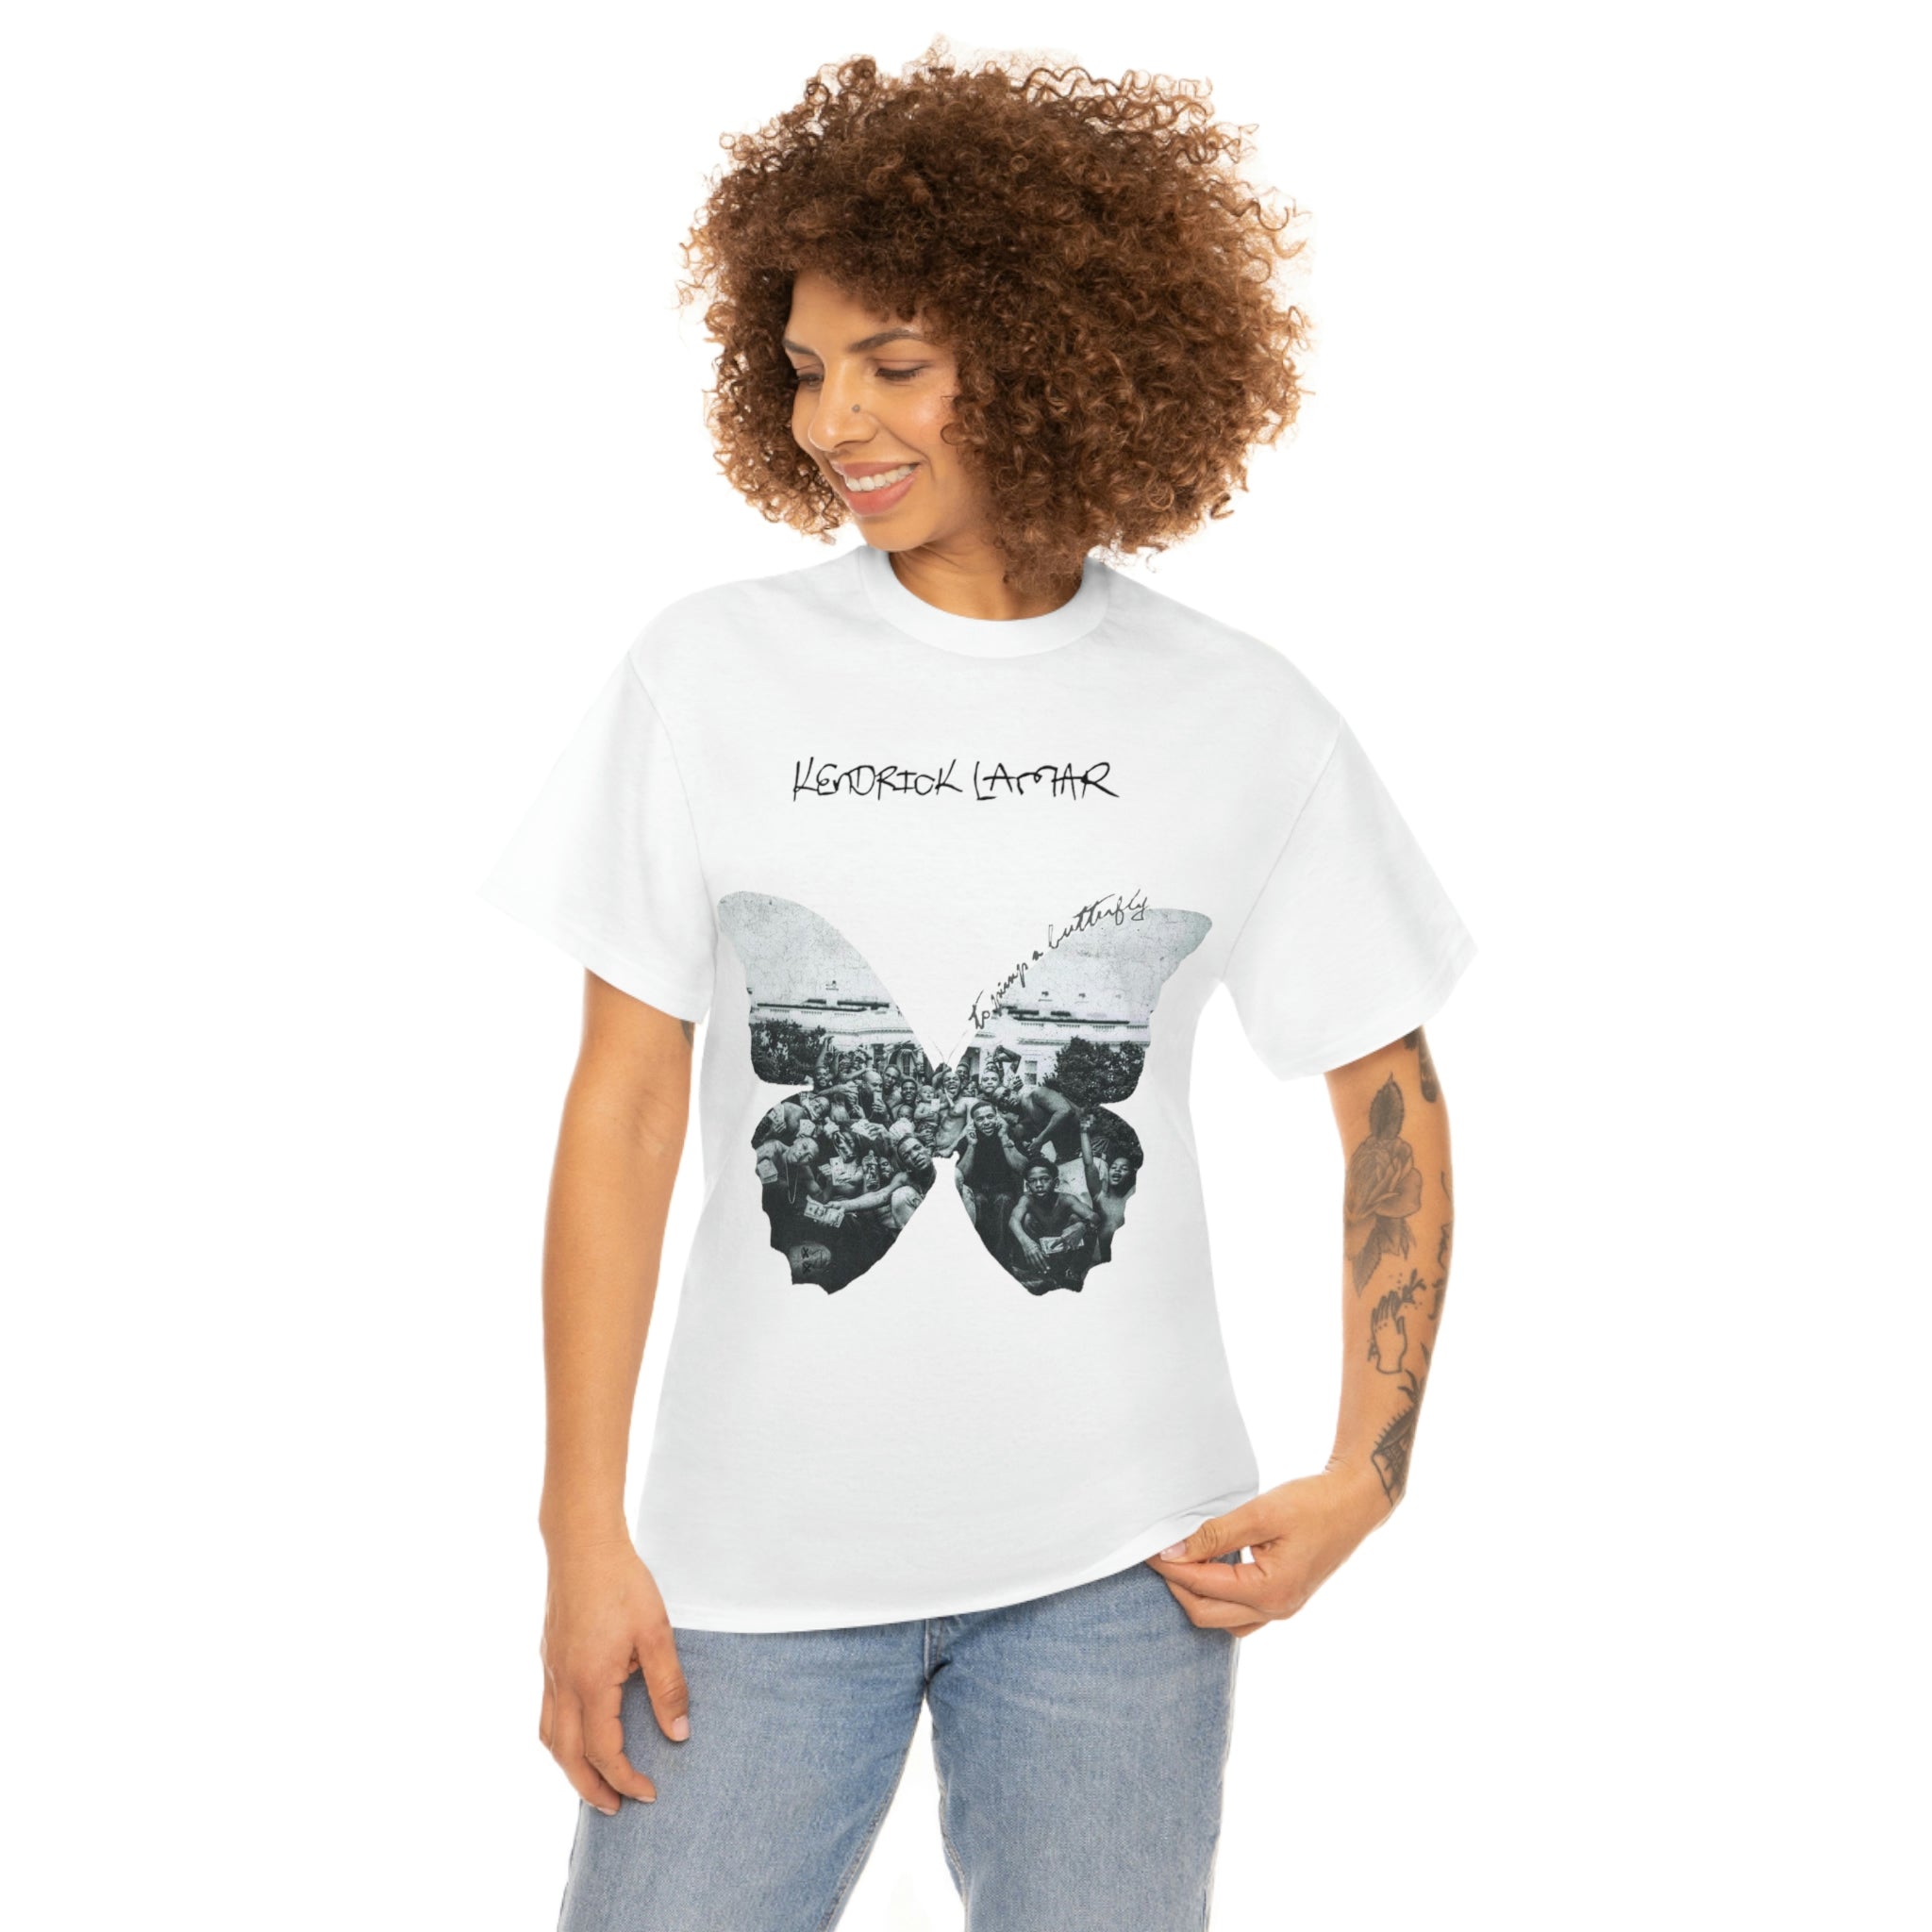 Kendrick Lamar To Pimp A Butterfly T-Shirt – NorthIcon Apparel